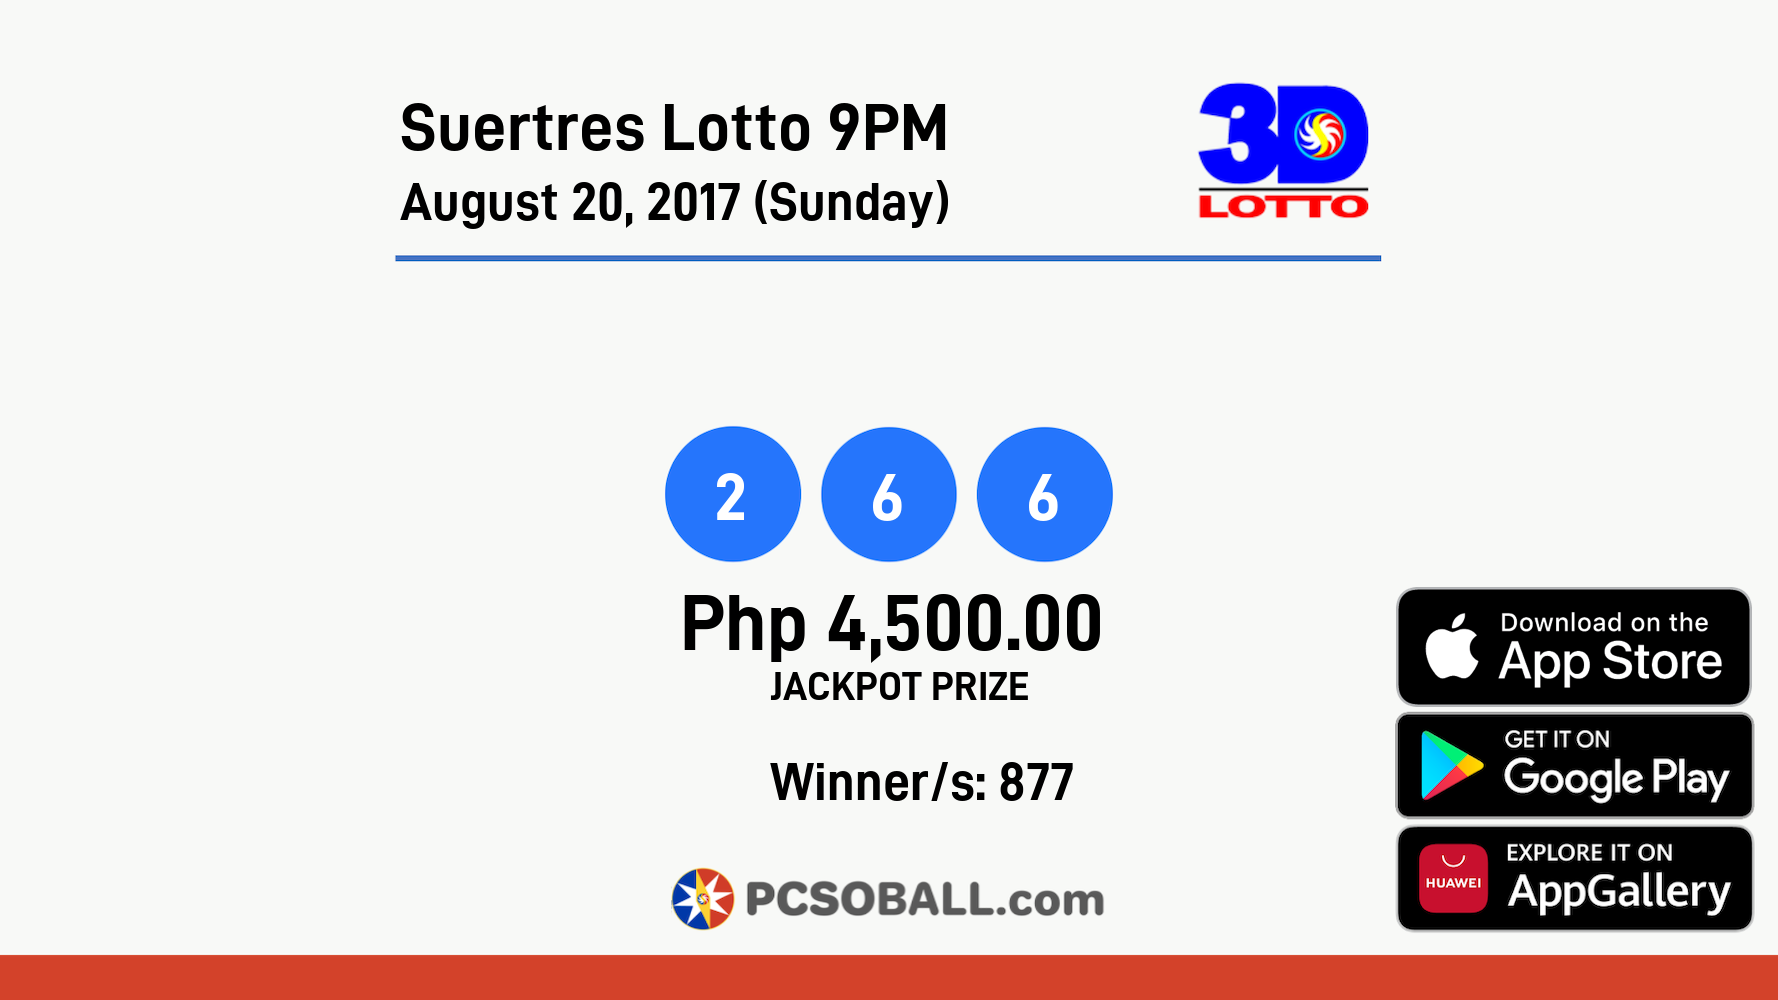 Suertres Lotto 9PM August 20, 2017 (Sunday) Result